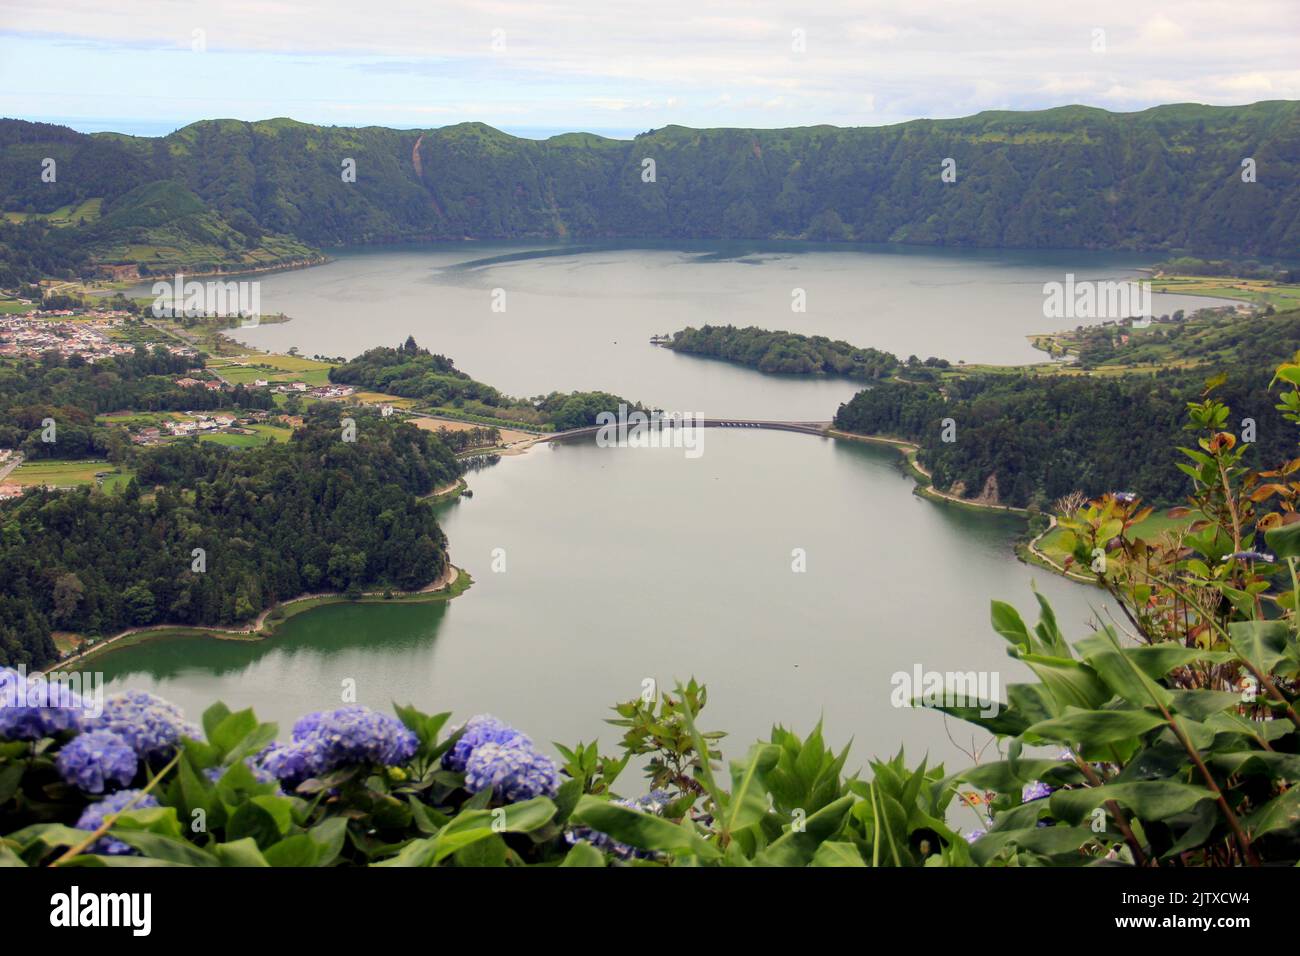 Sete Cidades, view from Southern point, Vista do Rei, Green Lake, Lagoa Verde, in the forefront, Sao Miguel Island, Azores, Portugal Stock Photo